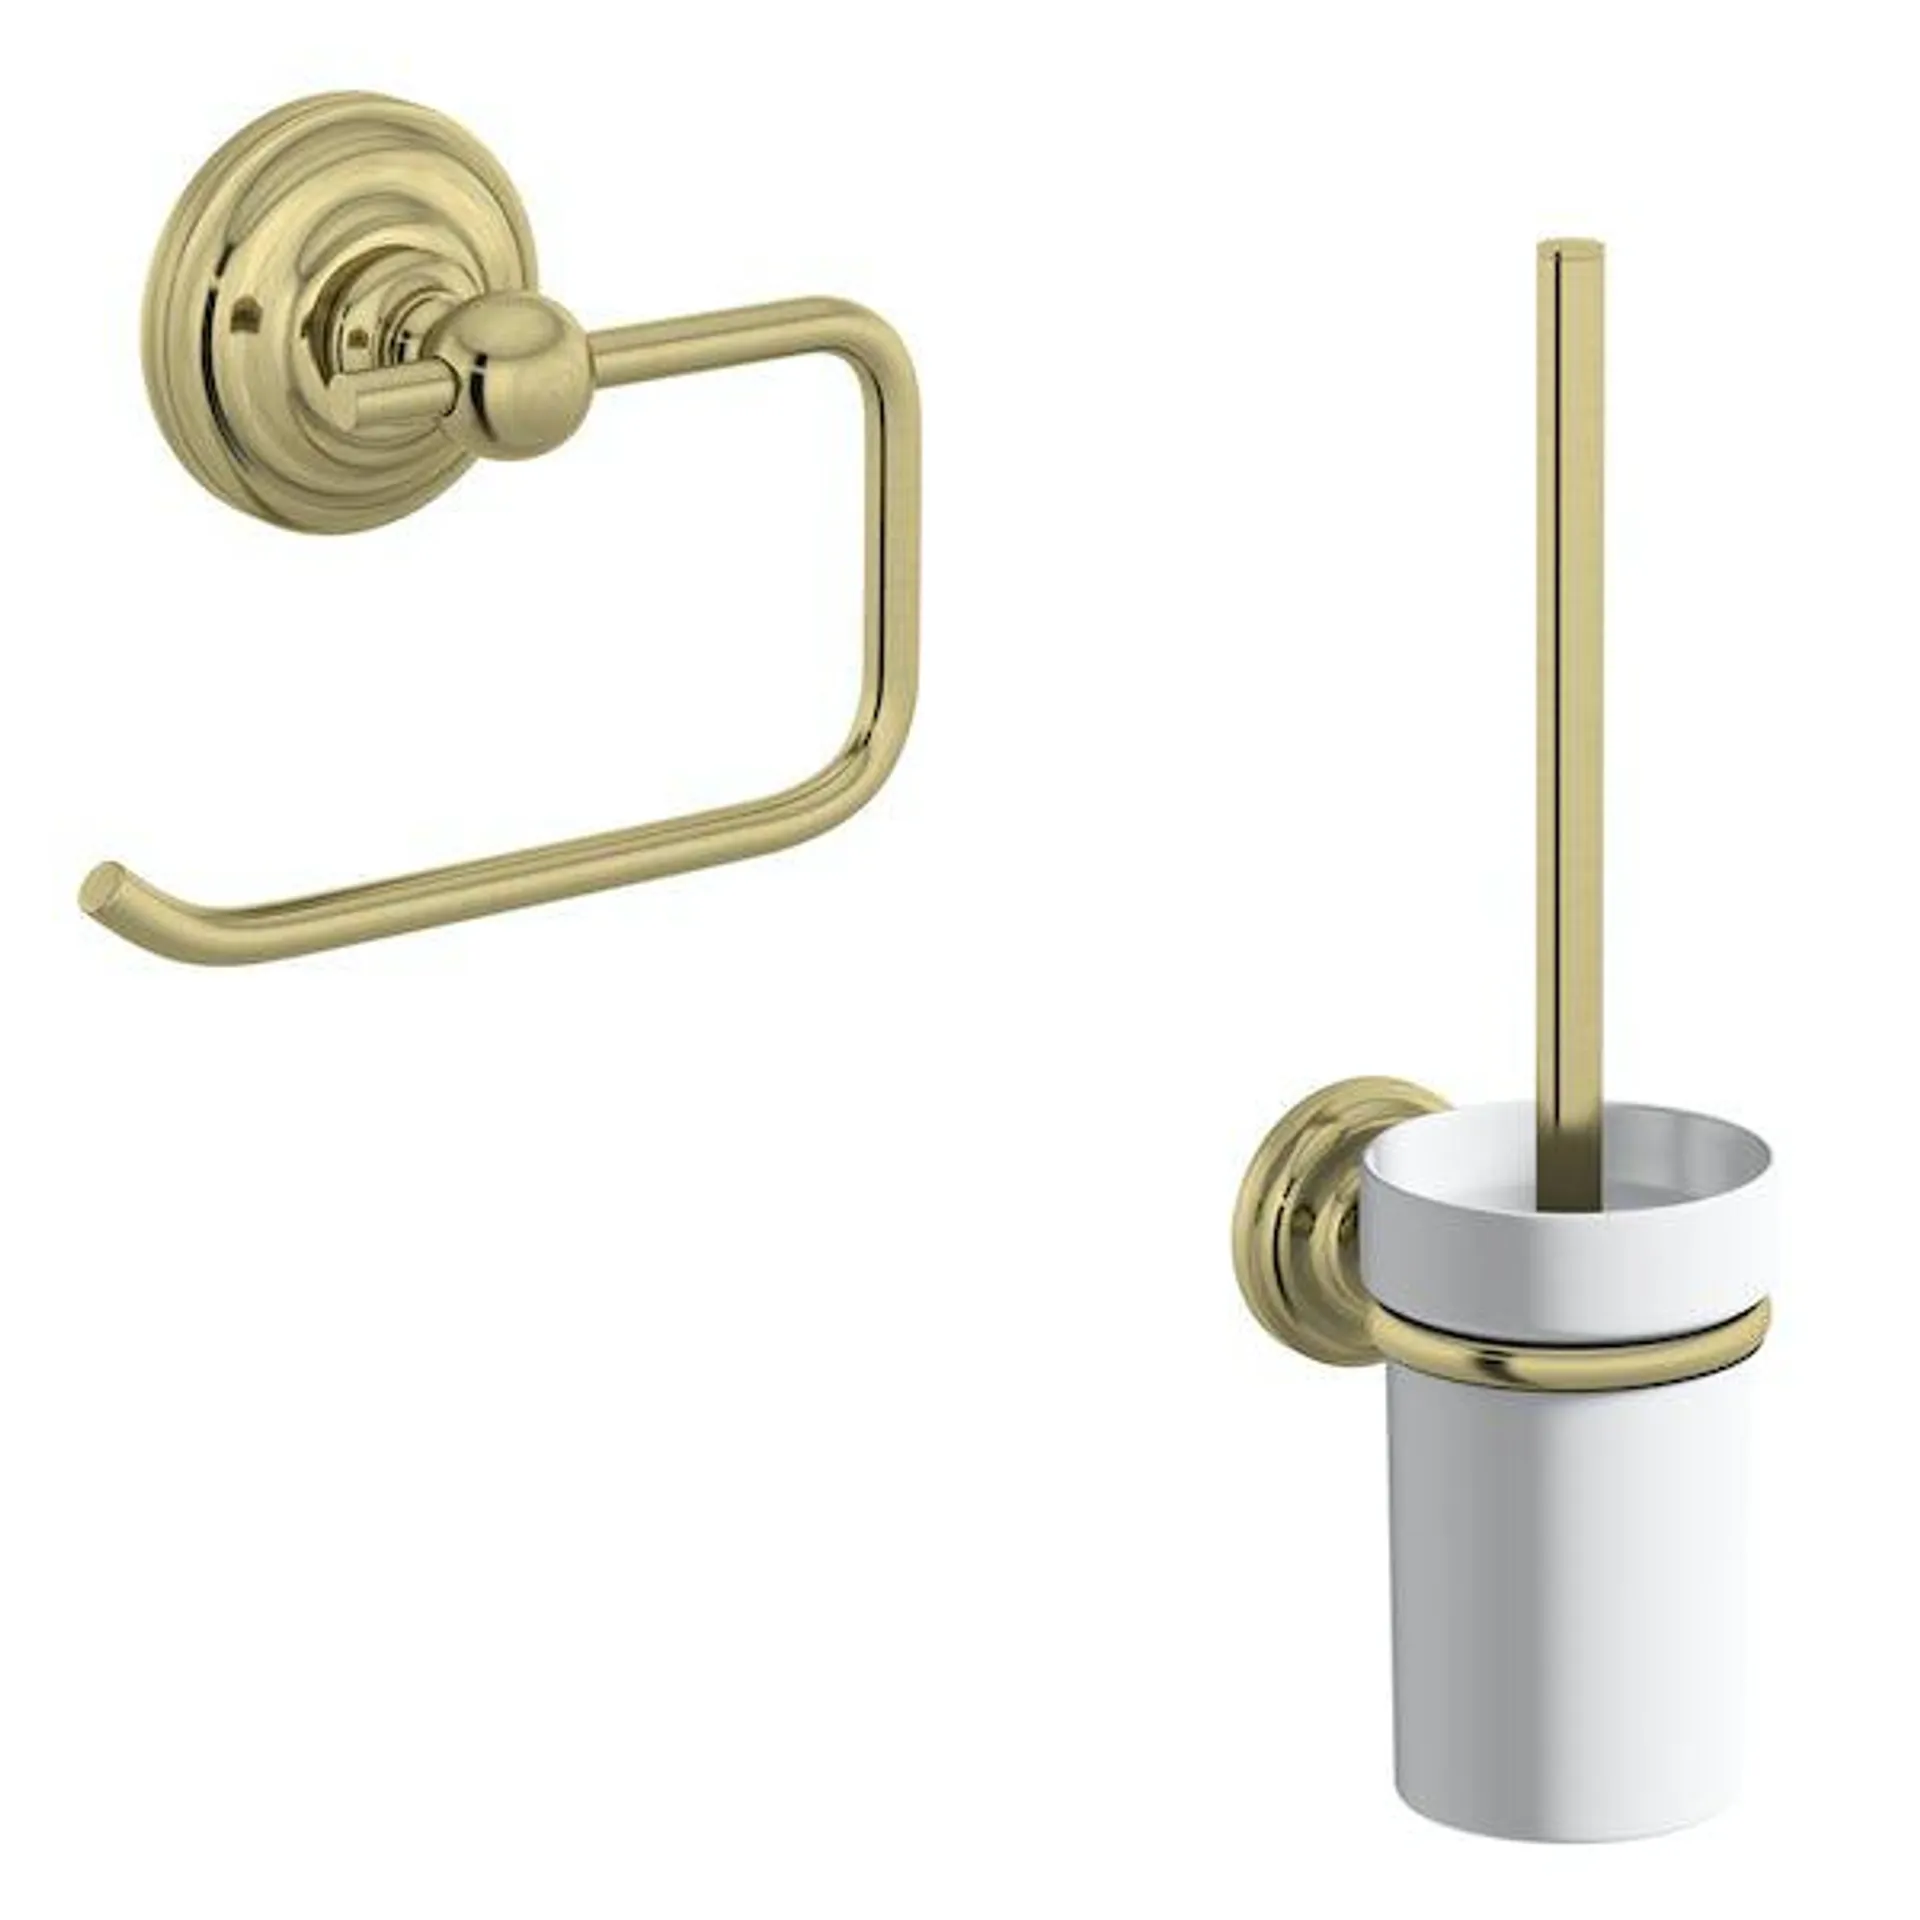 Accents 1805 antique gold 2 piece toilet accessory pack